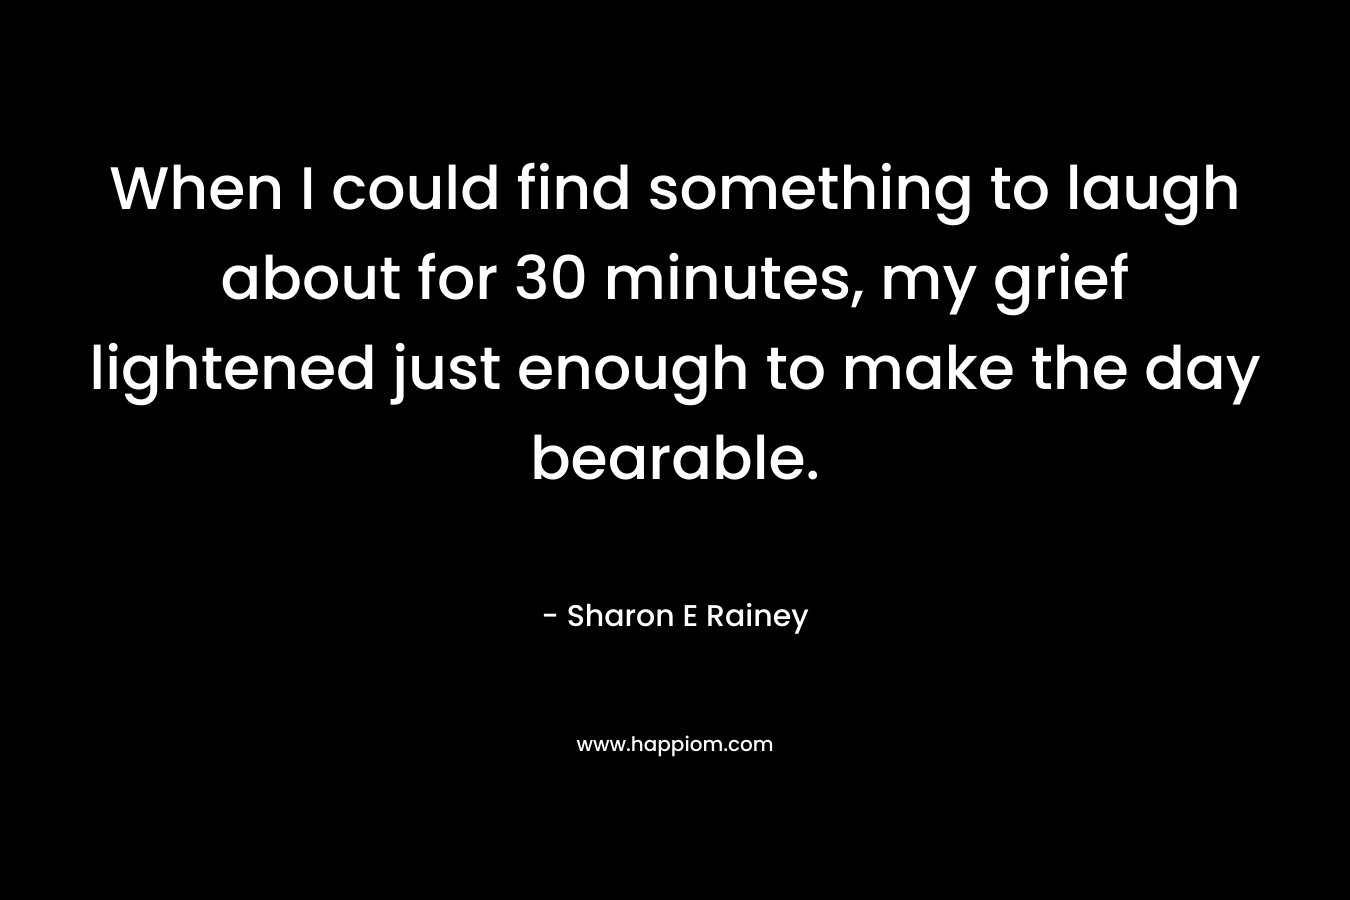 When I could find something to laugh about for 30 minutes, my grief lightened just enough to make the day bearable. – Sharon E Rainey